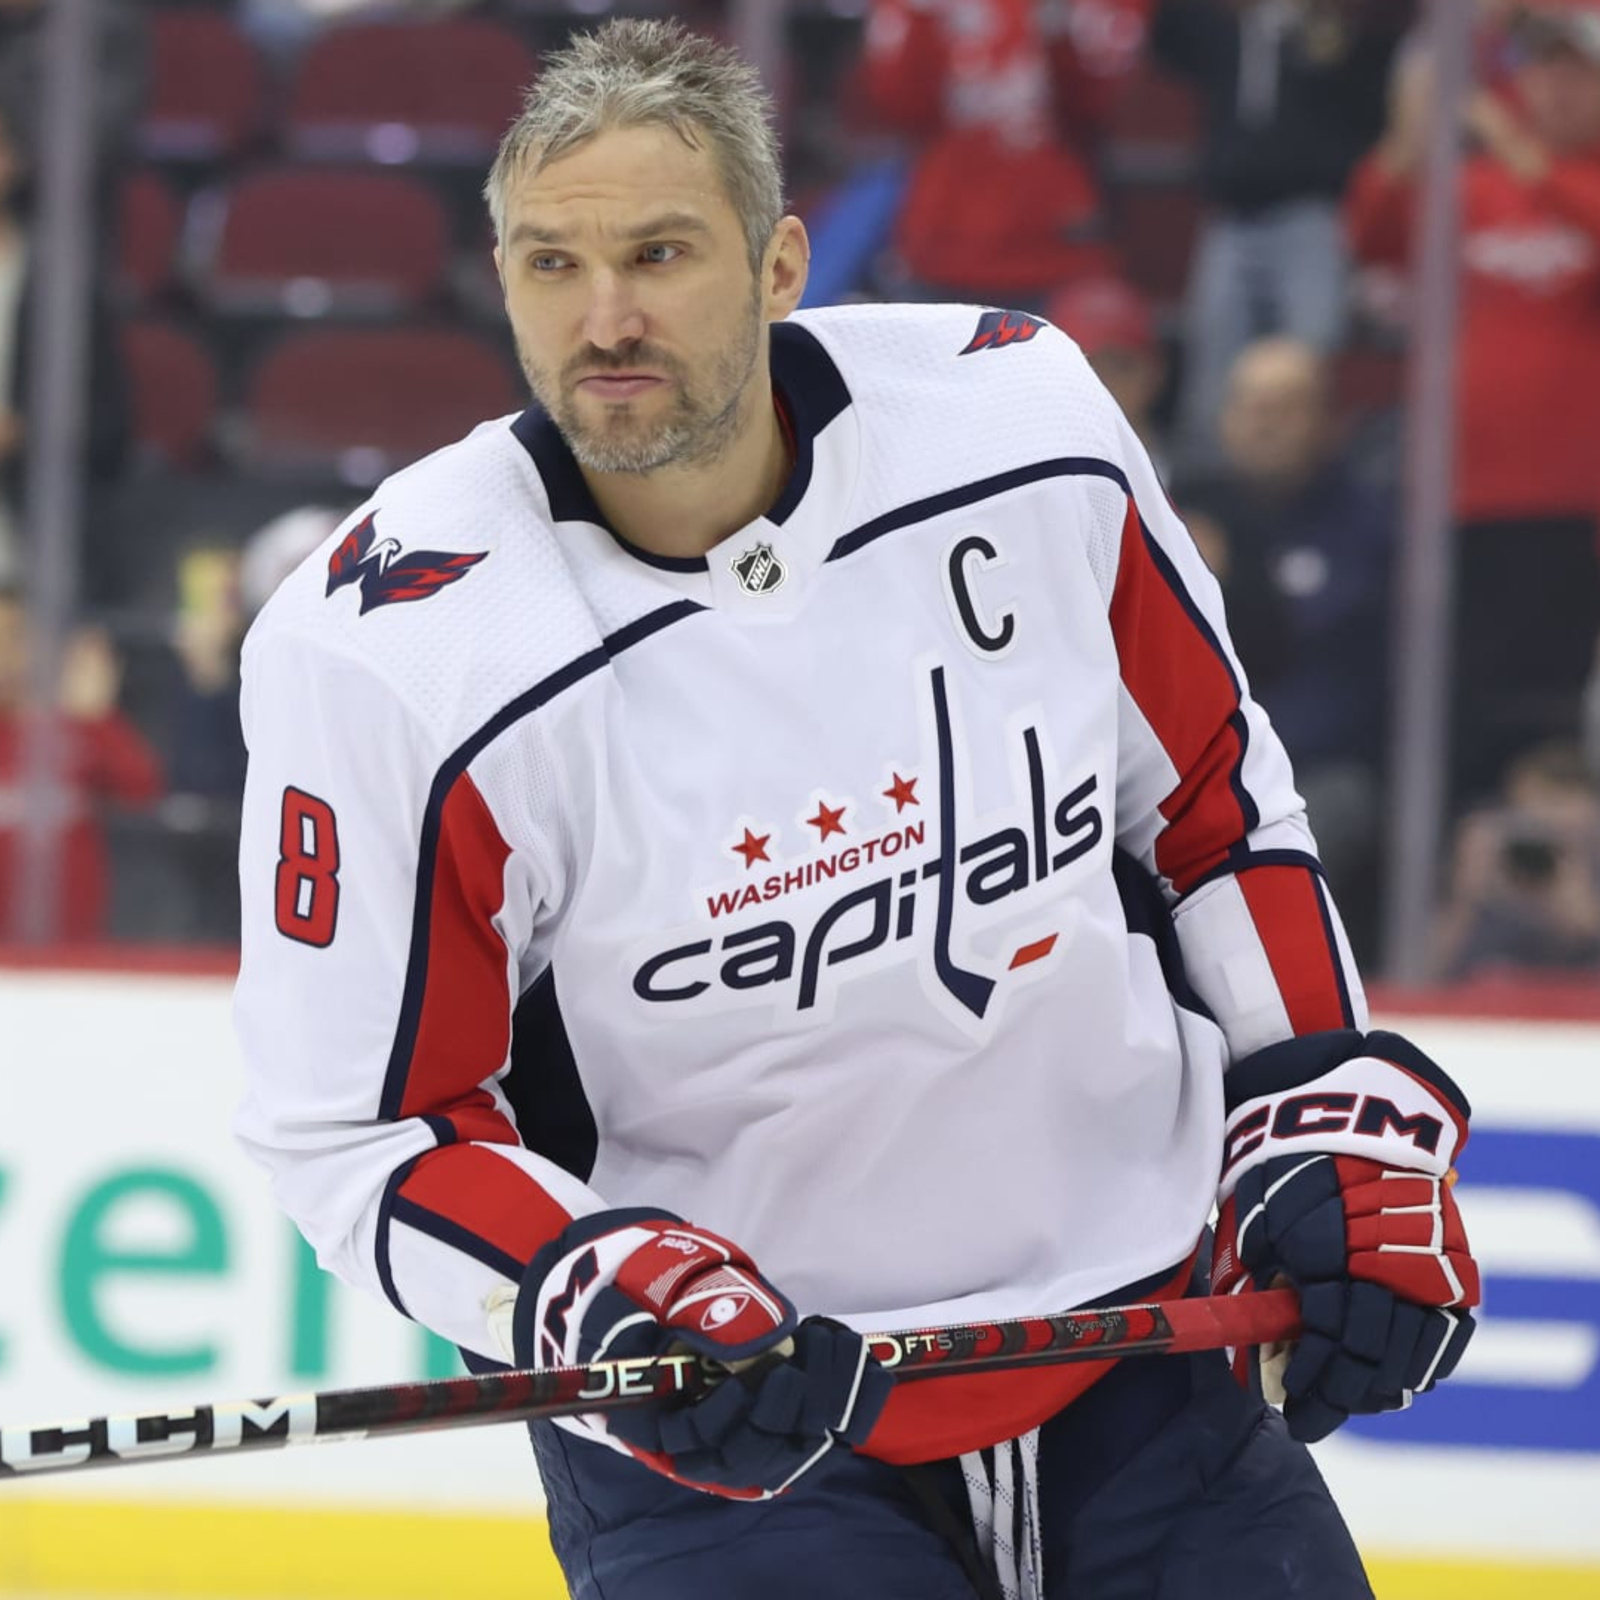 The Washington Capitals only exist for Alex Ovechkin's goal-record chase